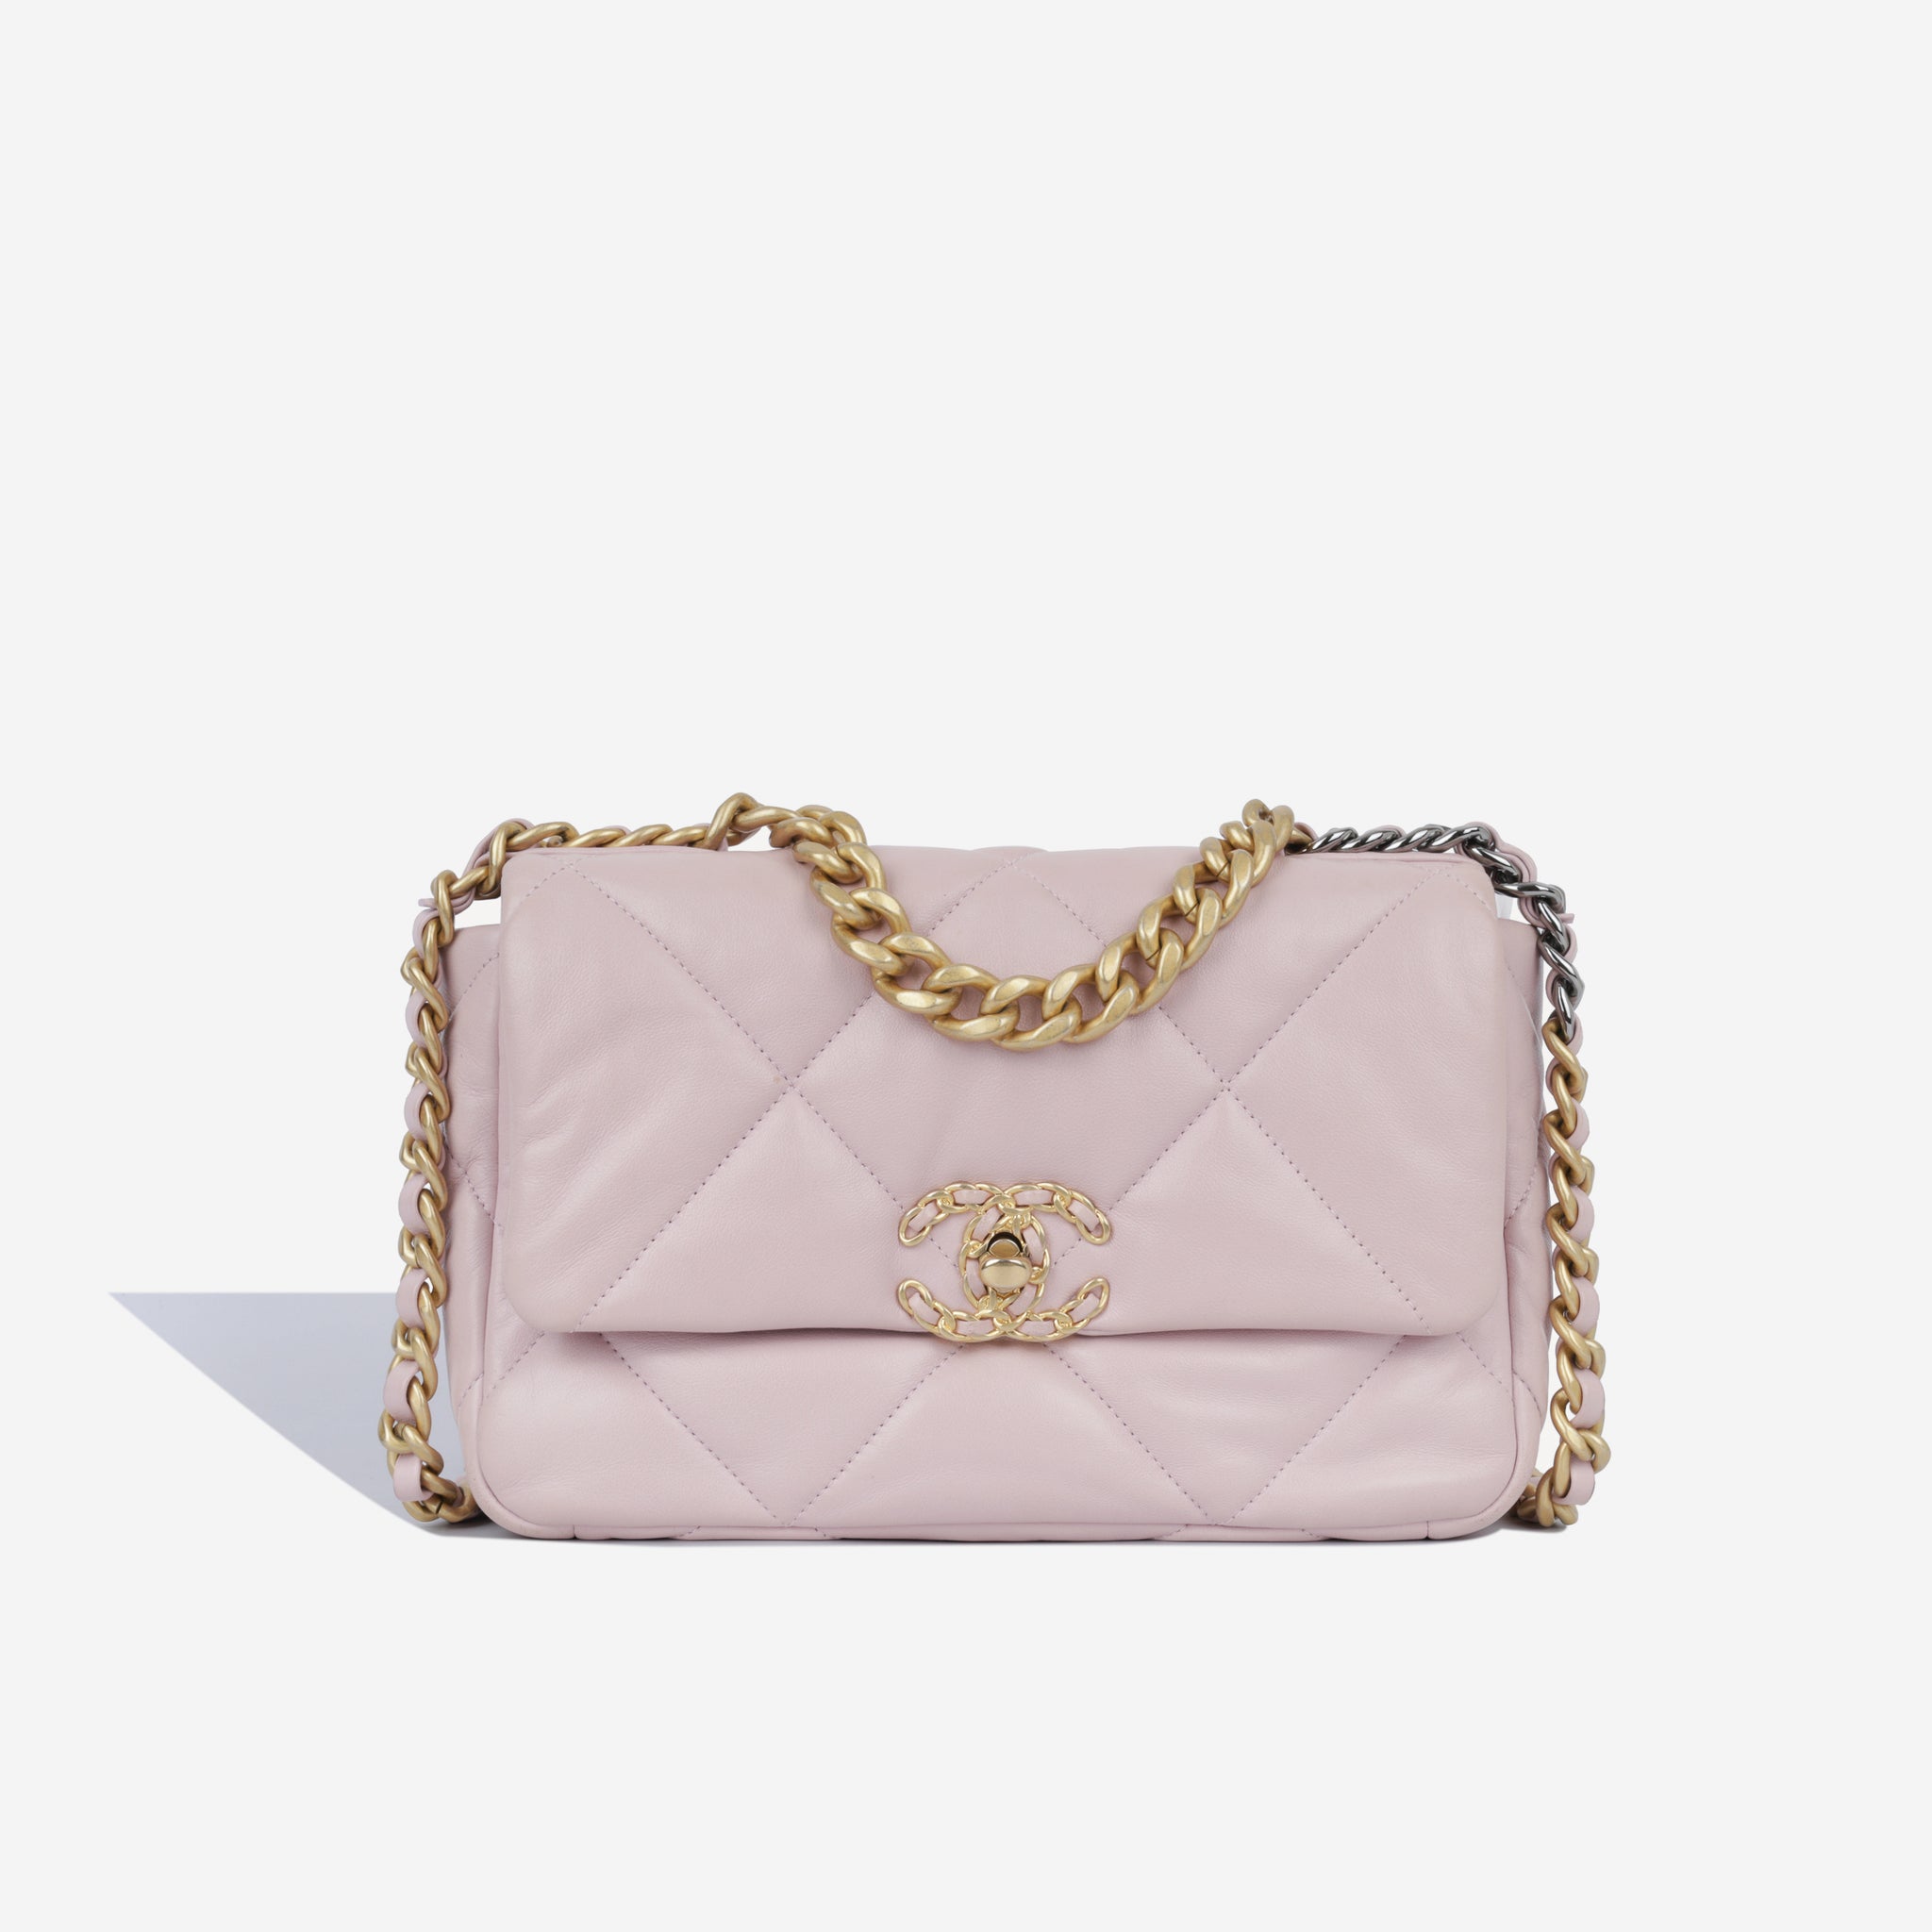 CHANEL 19 Small Quilted Pink Goat Skin Leather Small Shoulder Flap Bag